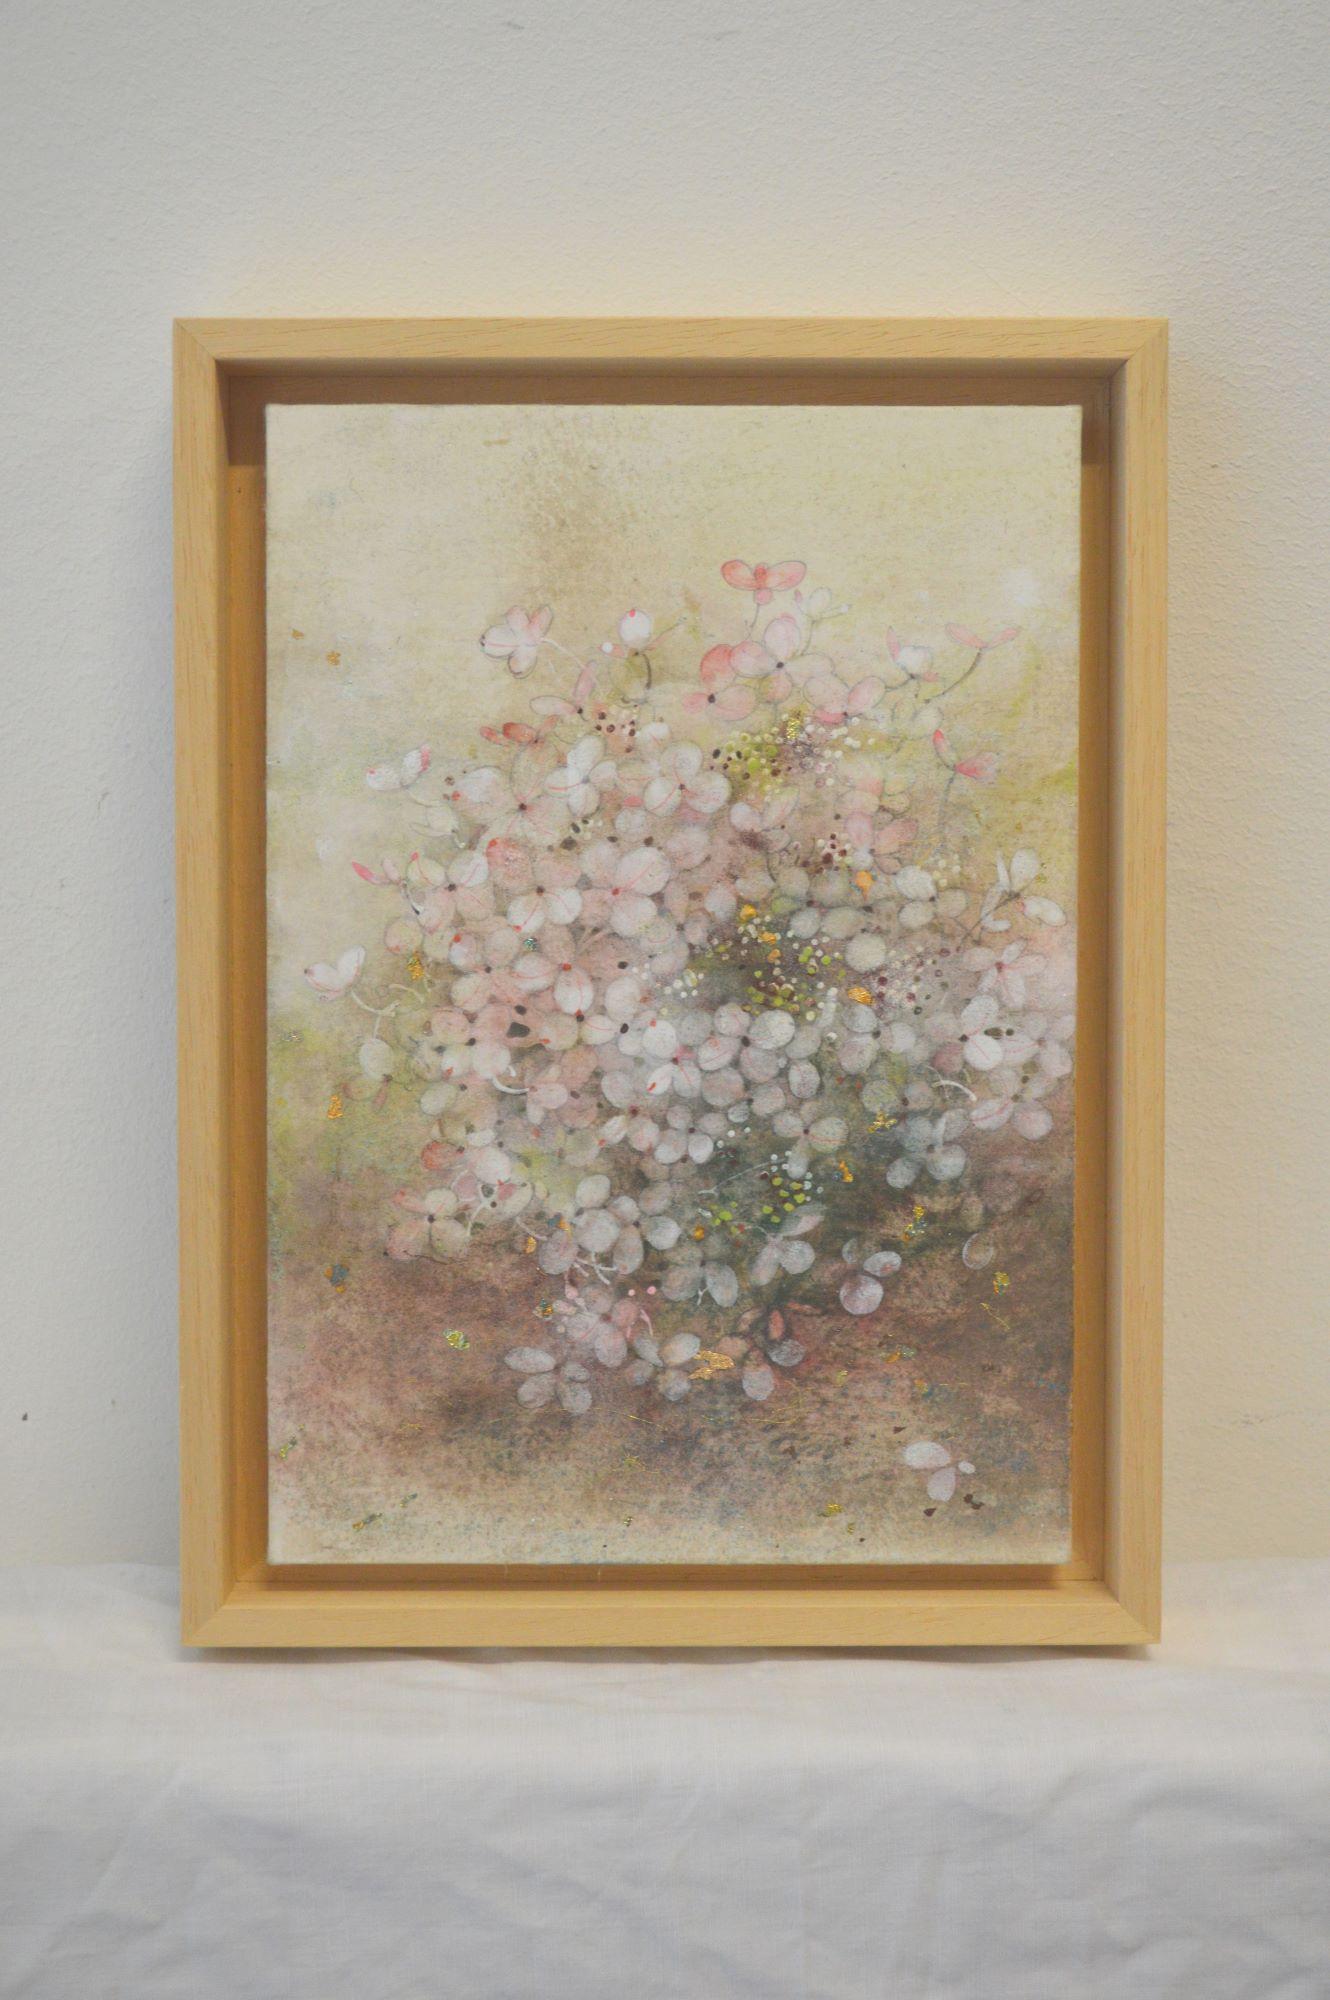 Hydrangea is a unique painting by contemporary artist Chen Yiching. The painting is made with mineral pigments, gold and silver leaf on Japanese paper mounted on wood, dimensions are 27.3 × 19 cm (10.7 × 7.5 in). Dimensions of the framed (natural